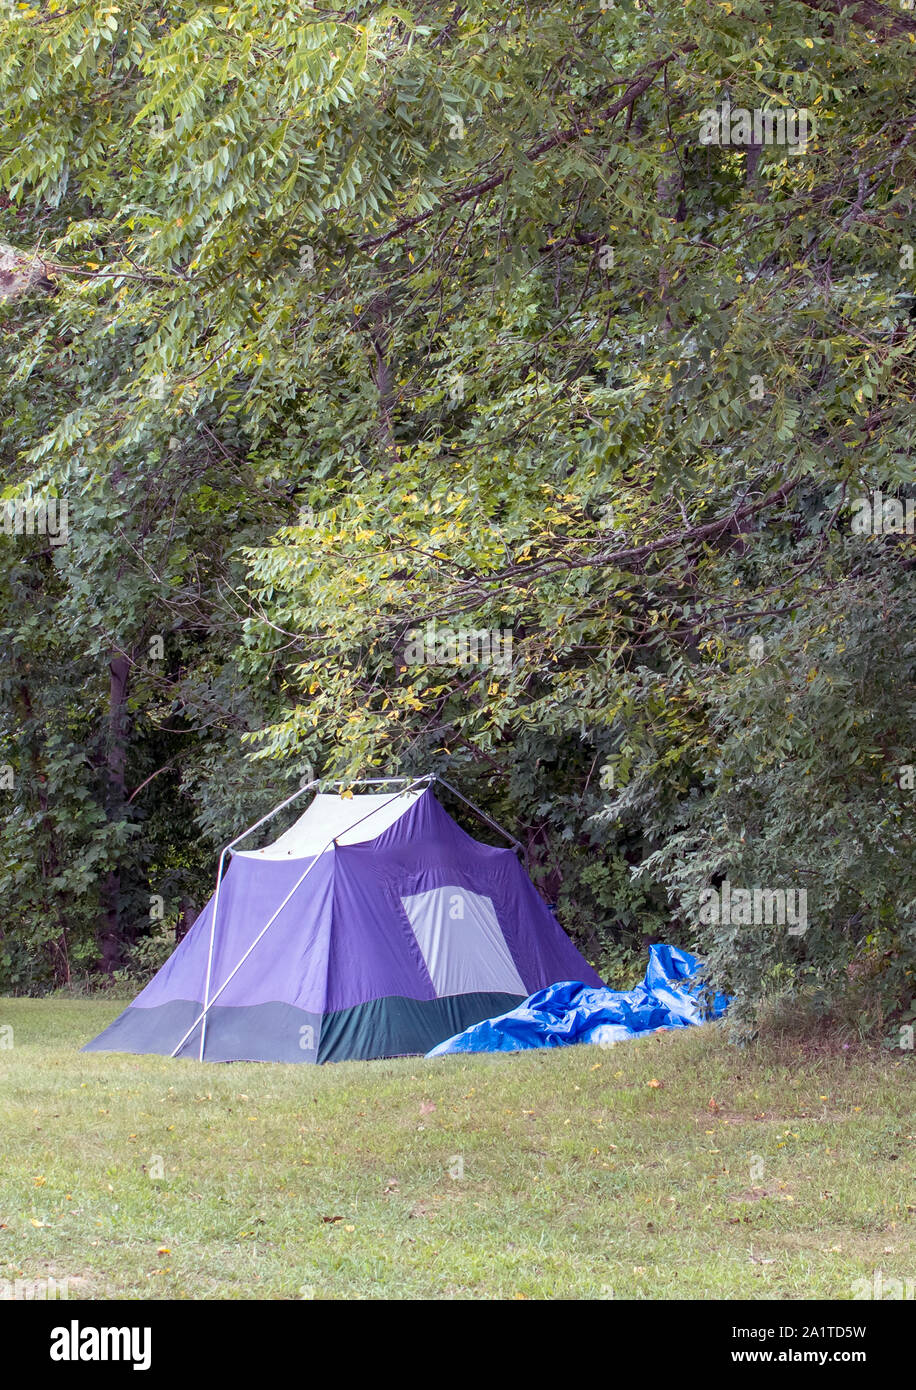 A small blue tent is set up for a fun, outdoor camping trip in the Indiana USA woods Stock Photo